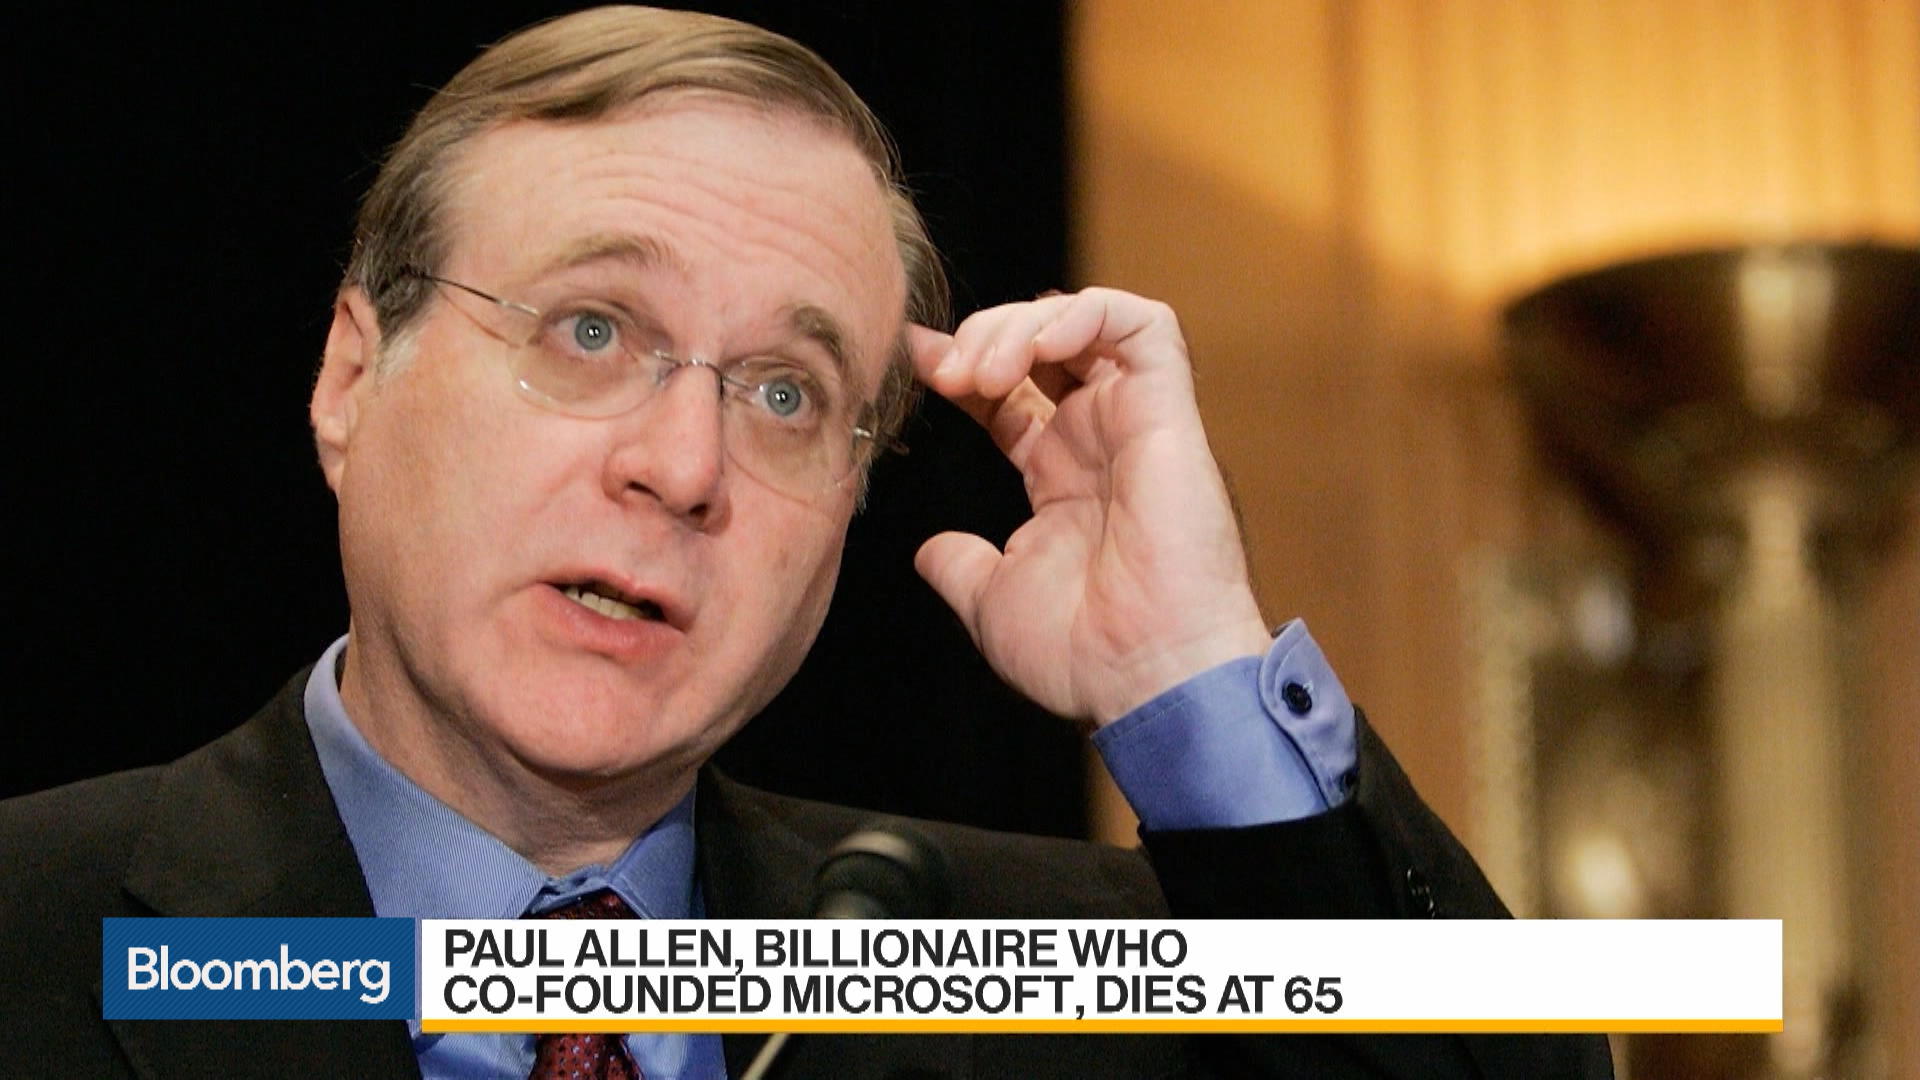 Paul Allen, Billionaire Who Co-Founded Microsoft, Dies – Bloomberg